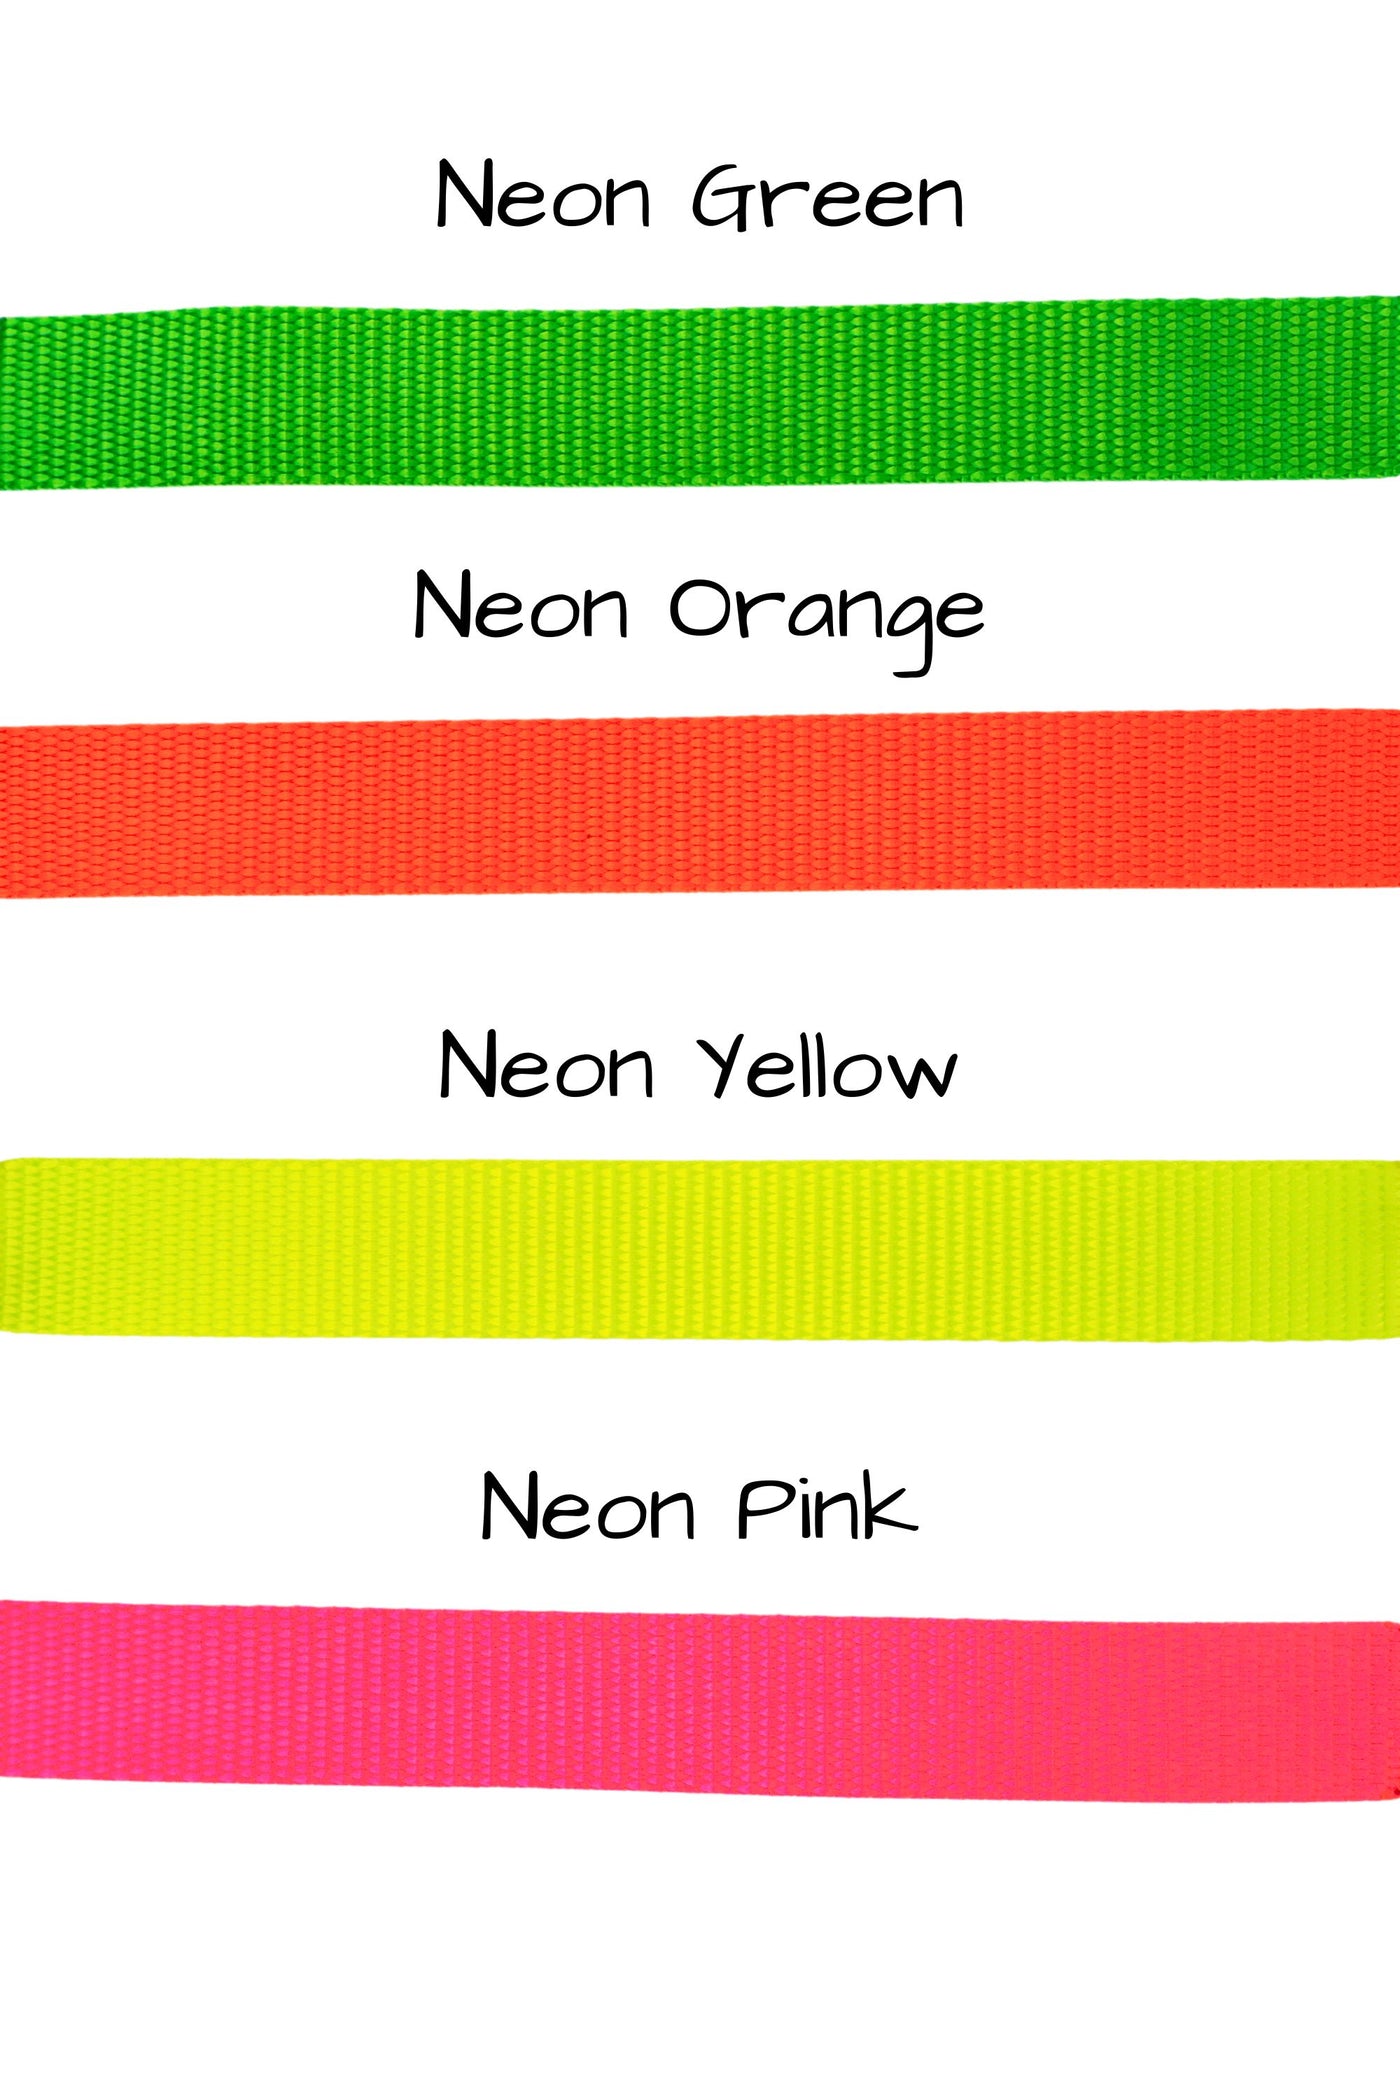 Four neon colors are available for the adjustable leashes, including neon green, neon orange, neon yellow, or neon pink.